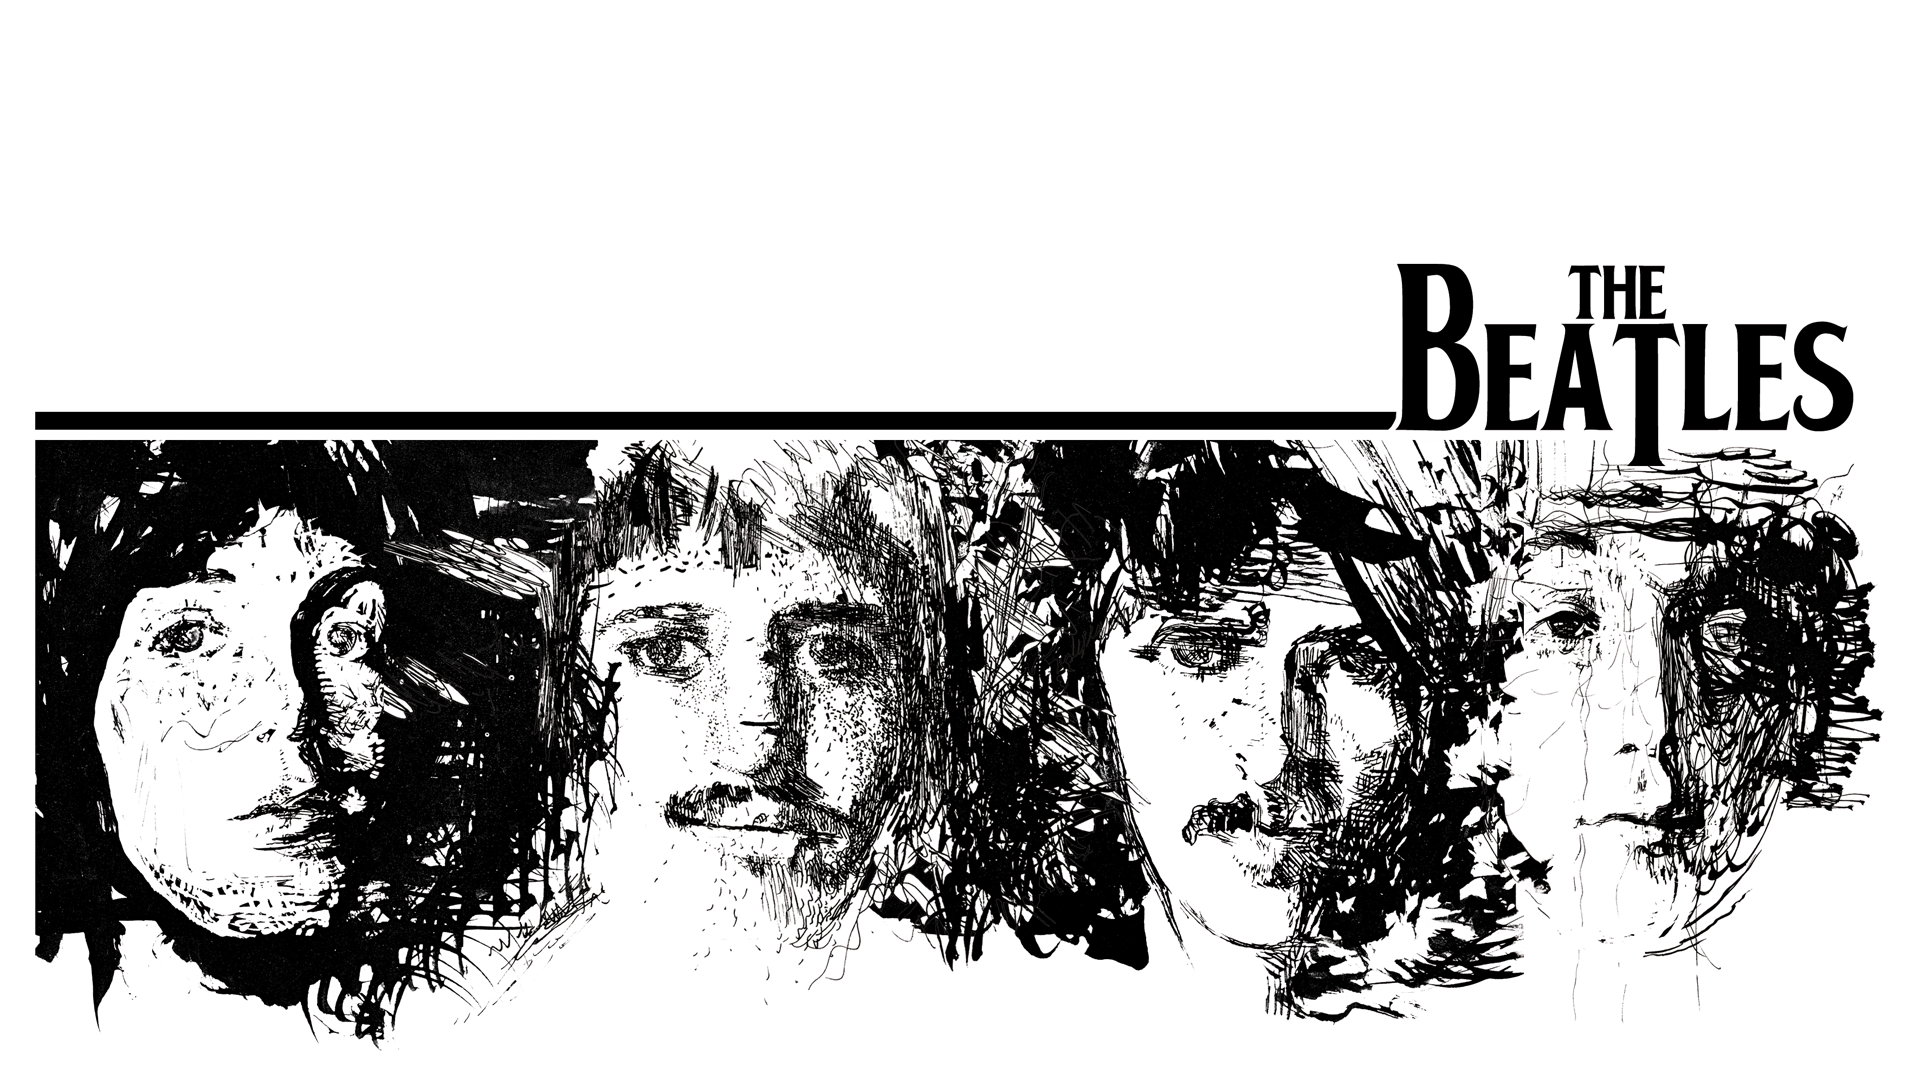 the beatles png